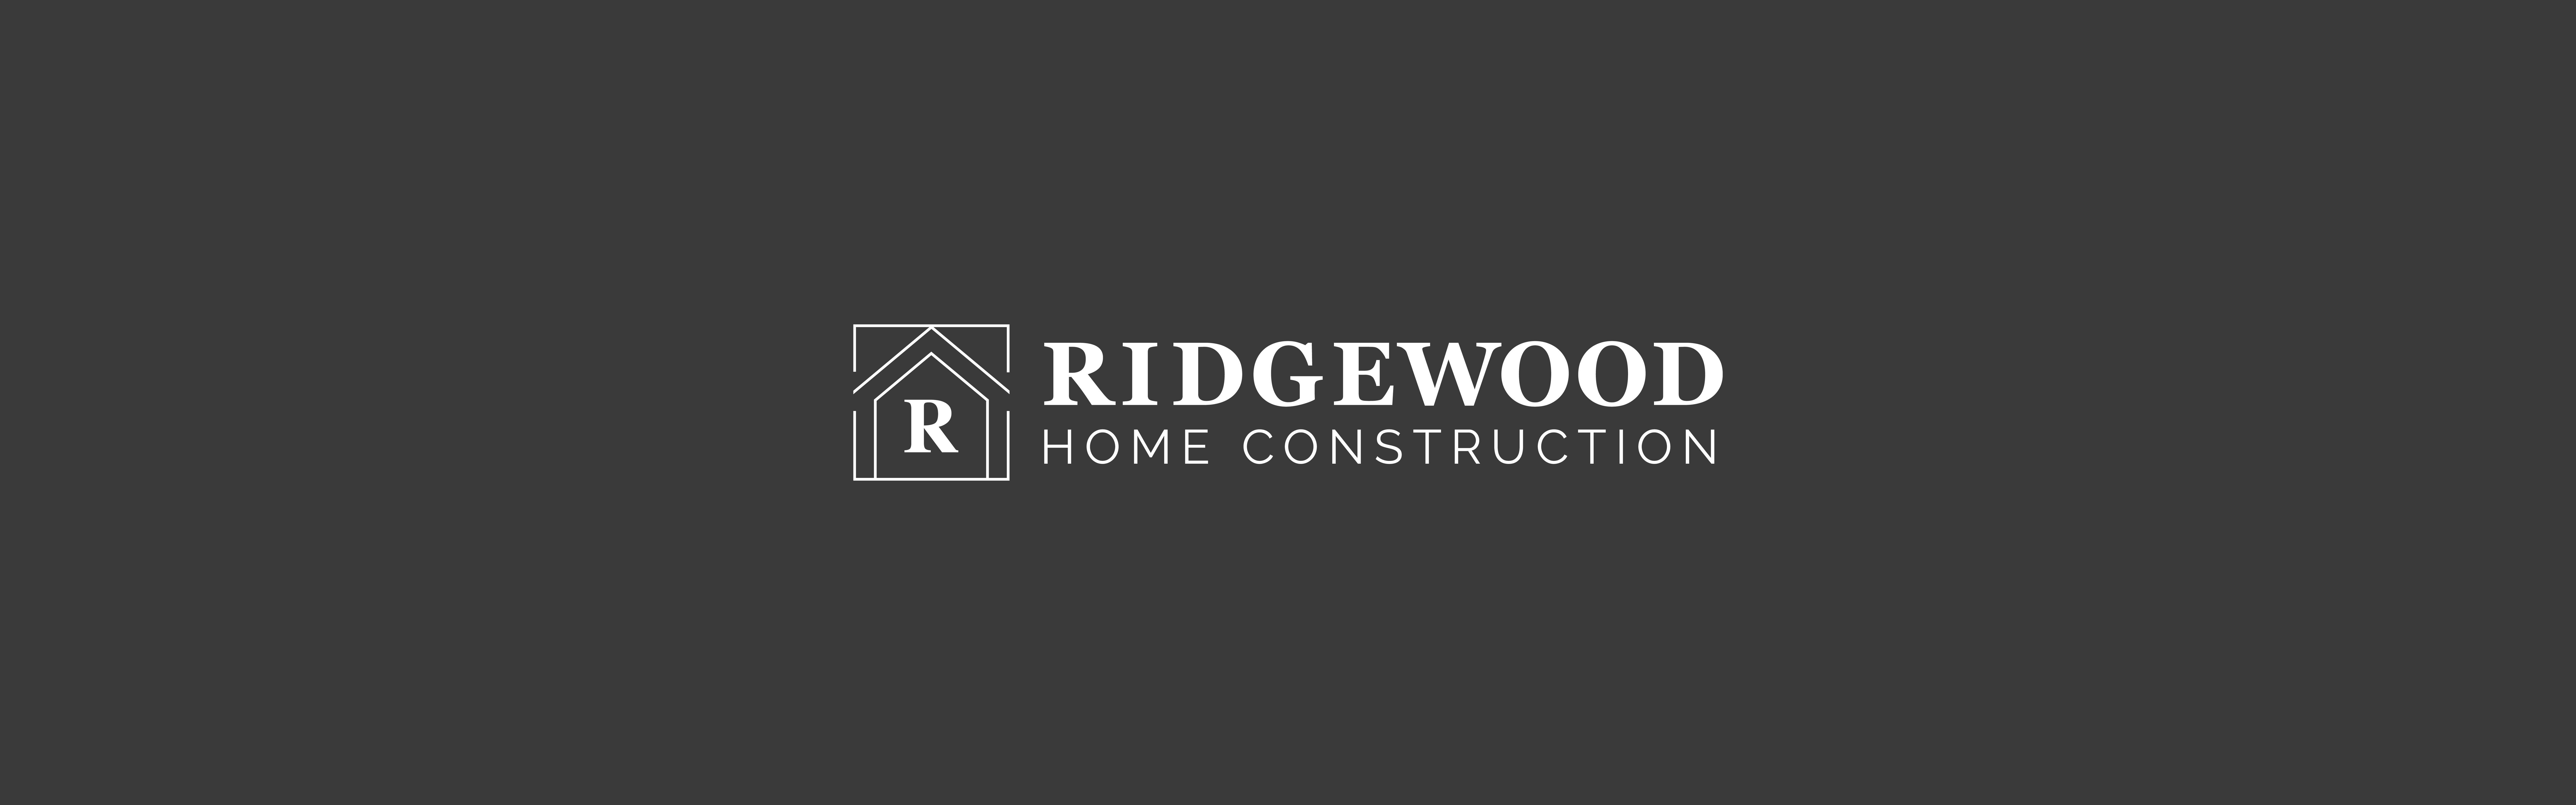 Logo of "Ridgewood Home Construction" with a stylized 'R' emblem on a dark background.